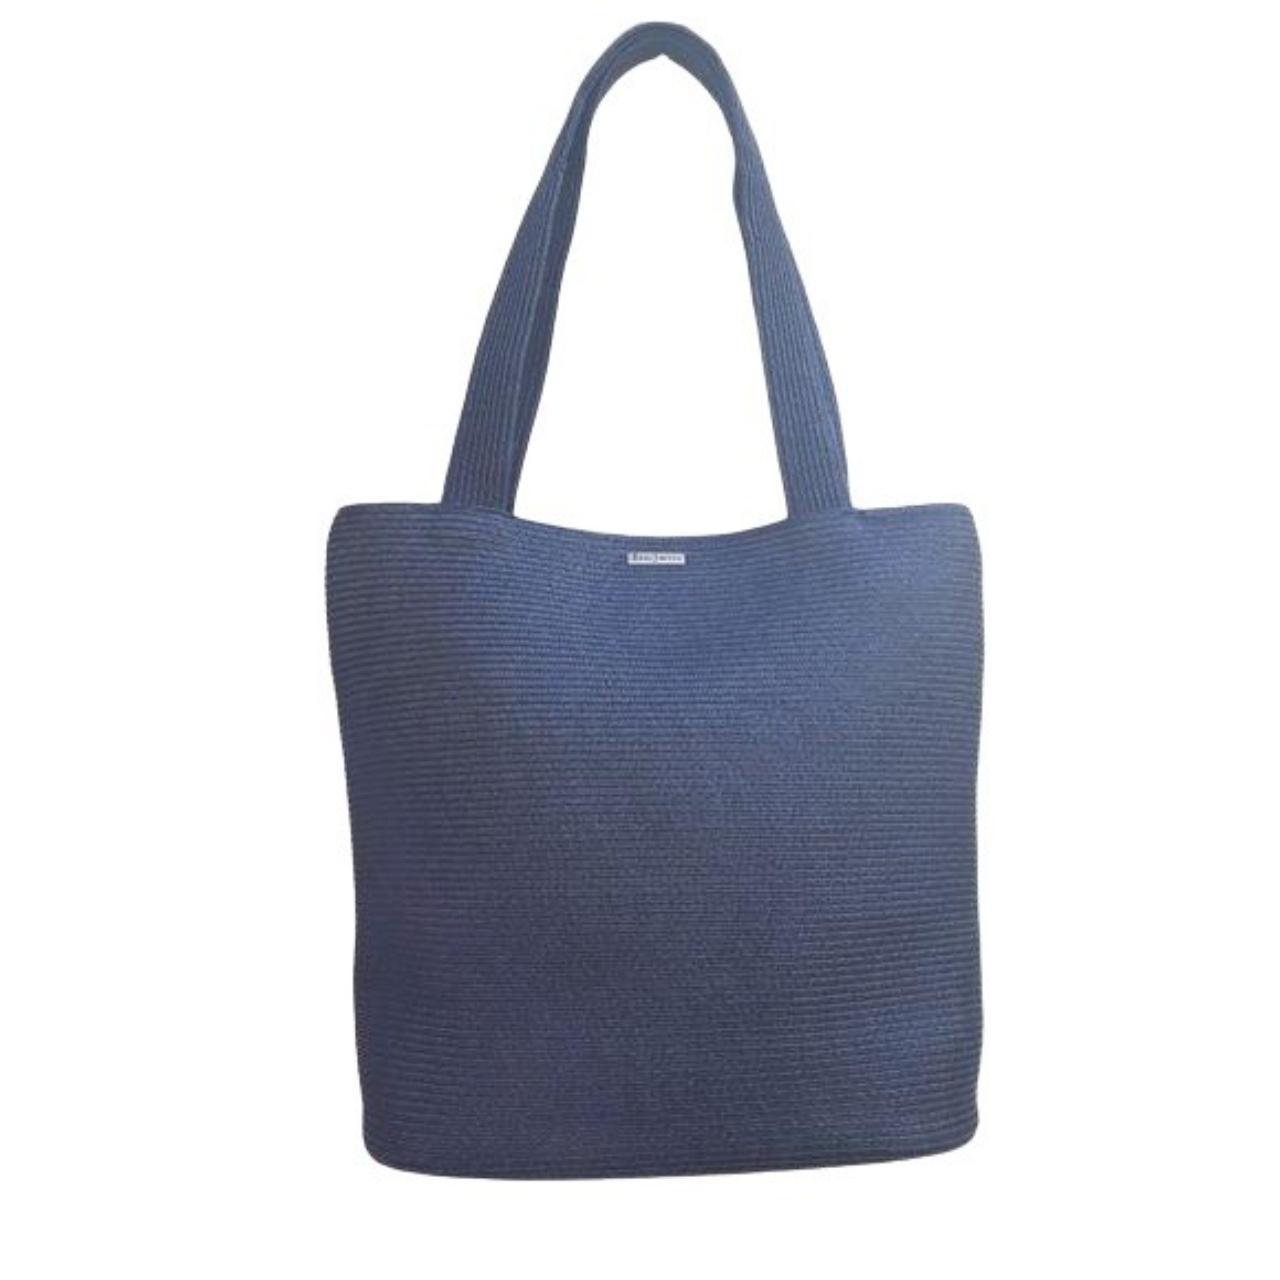 Product Image 1 - Lightweight black Squishee tote basket